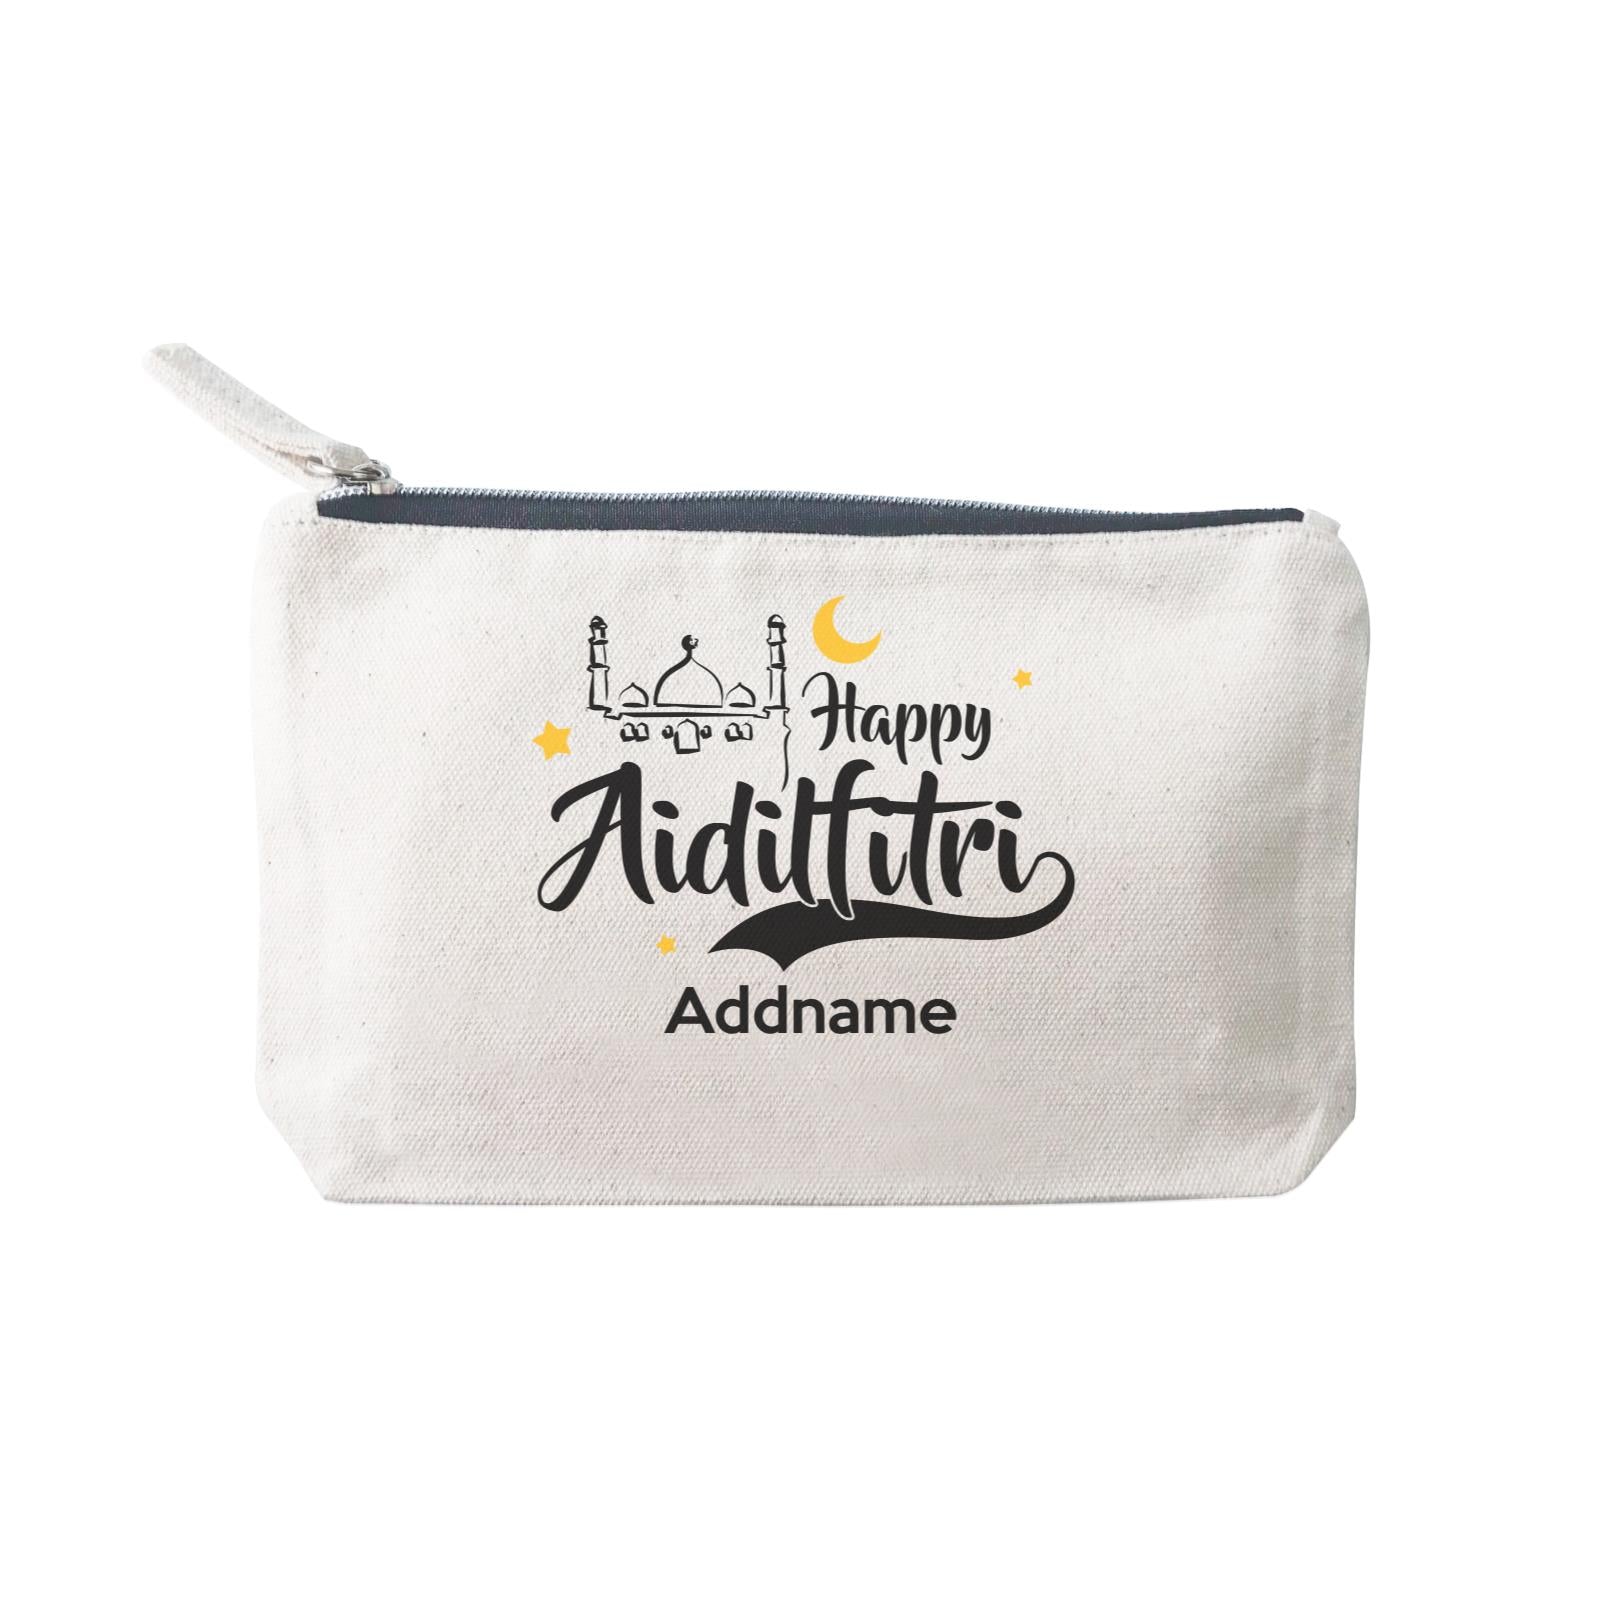 Raya Typography Doodle Mosque Happy Aidilfitri Addname Mini Accessories Stationery Pouch 2